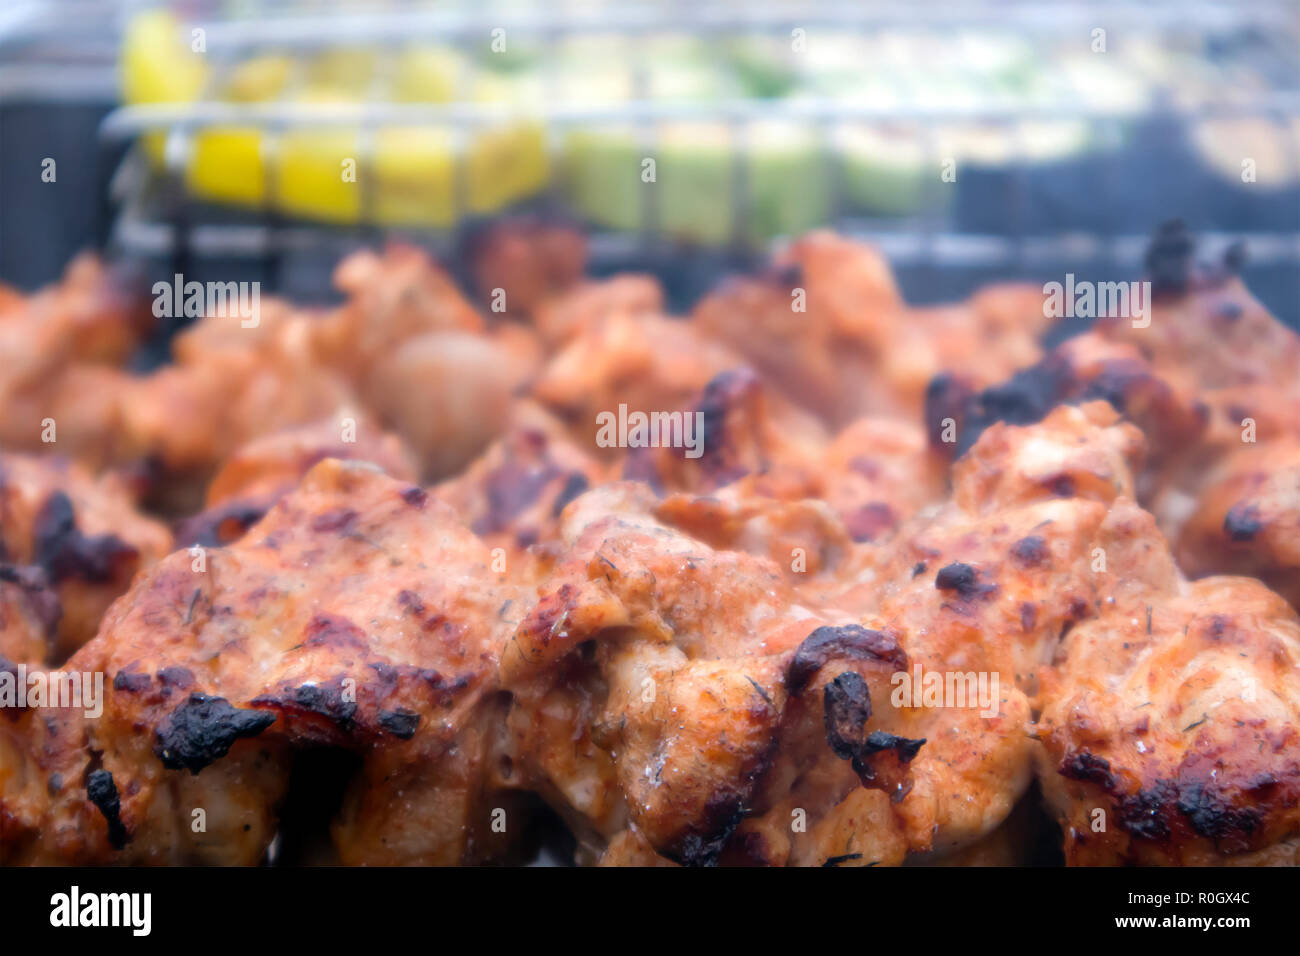 Skewers with roasted chiken meat and vegetables on the hot grill closeup, weekend barbecue Stock Photo